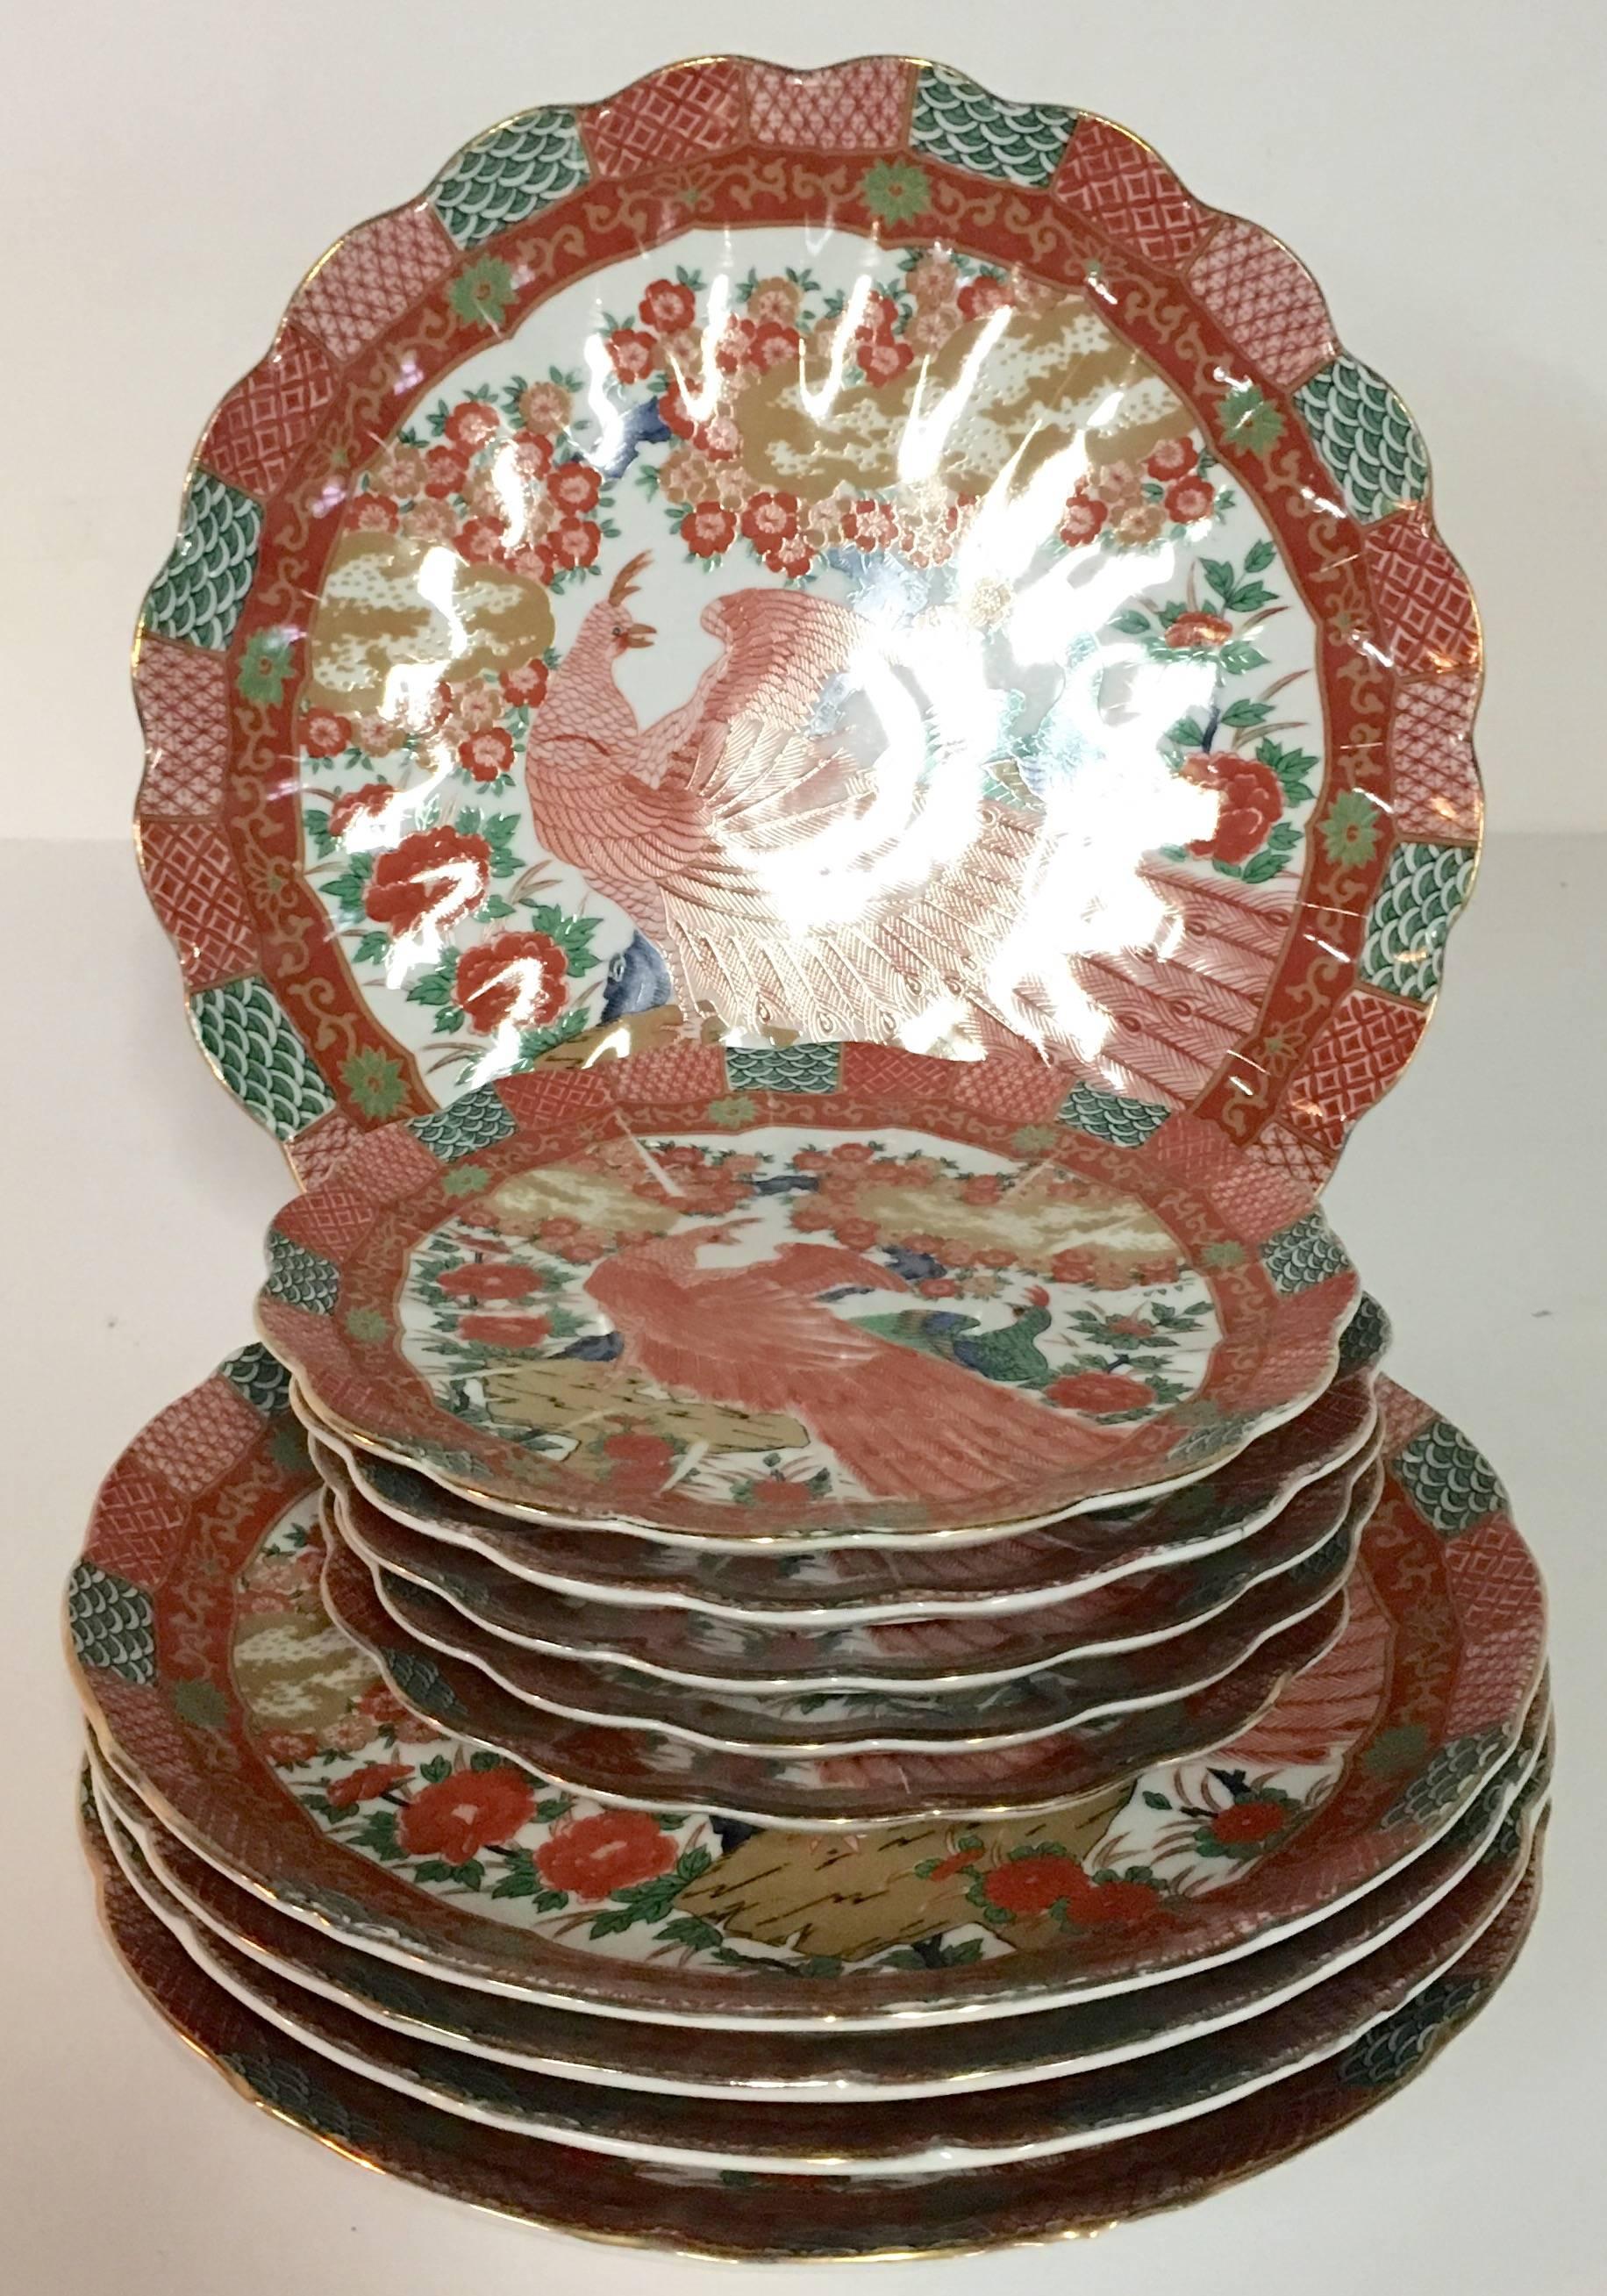 Set of ten Imari peacock plates with beautiful scalloped edge and 22-karat gold detail by, Arita, Japan plates. This hand decorated set includes one round platter, four dinner plates, 1.25